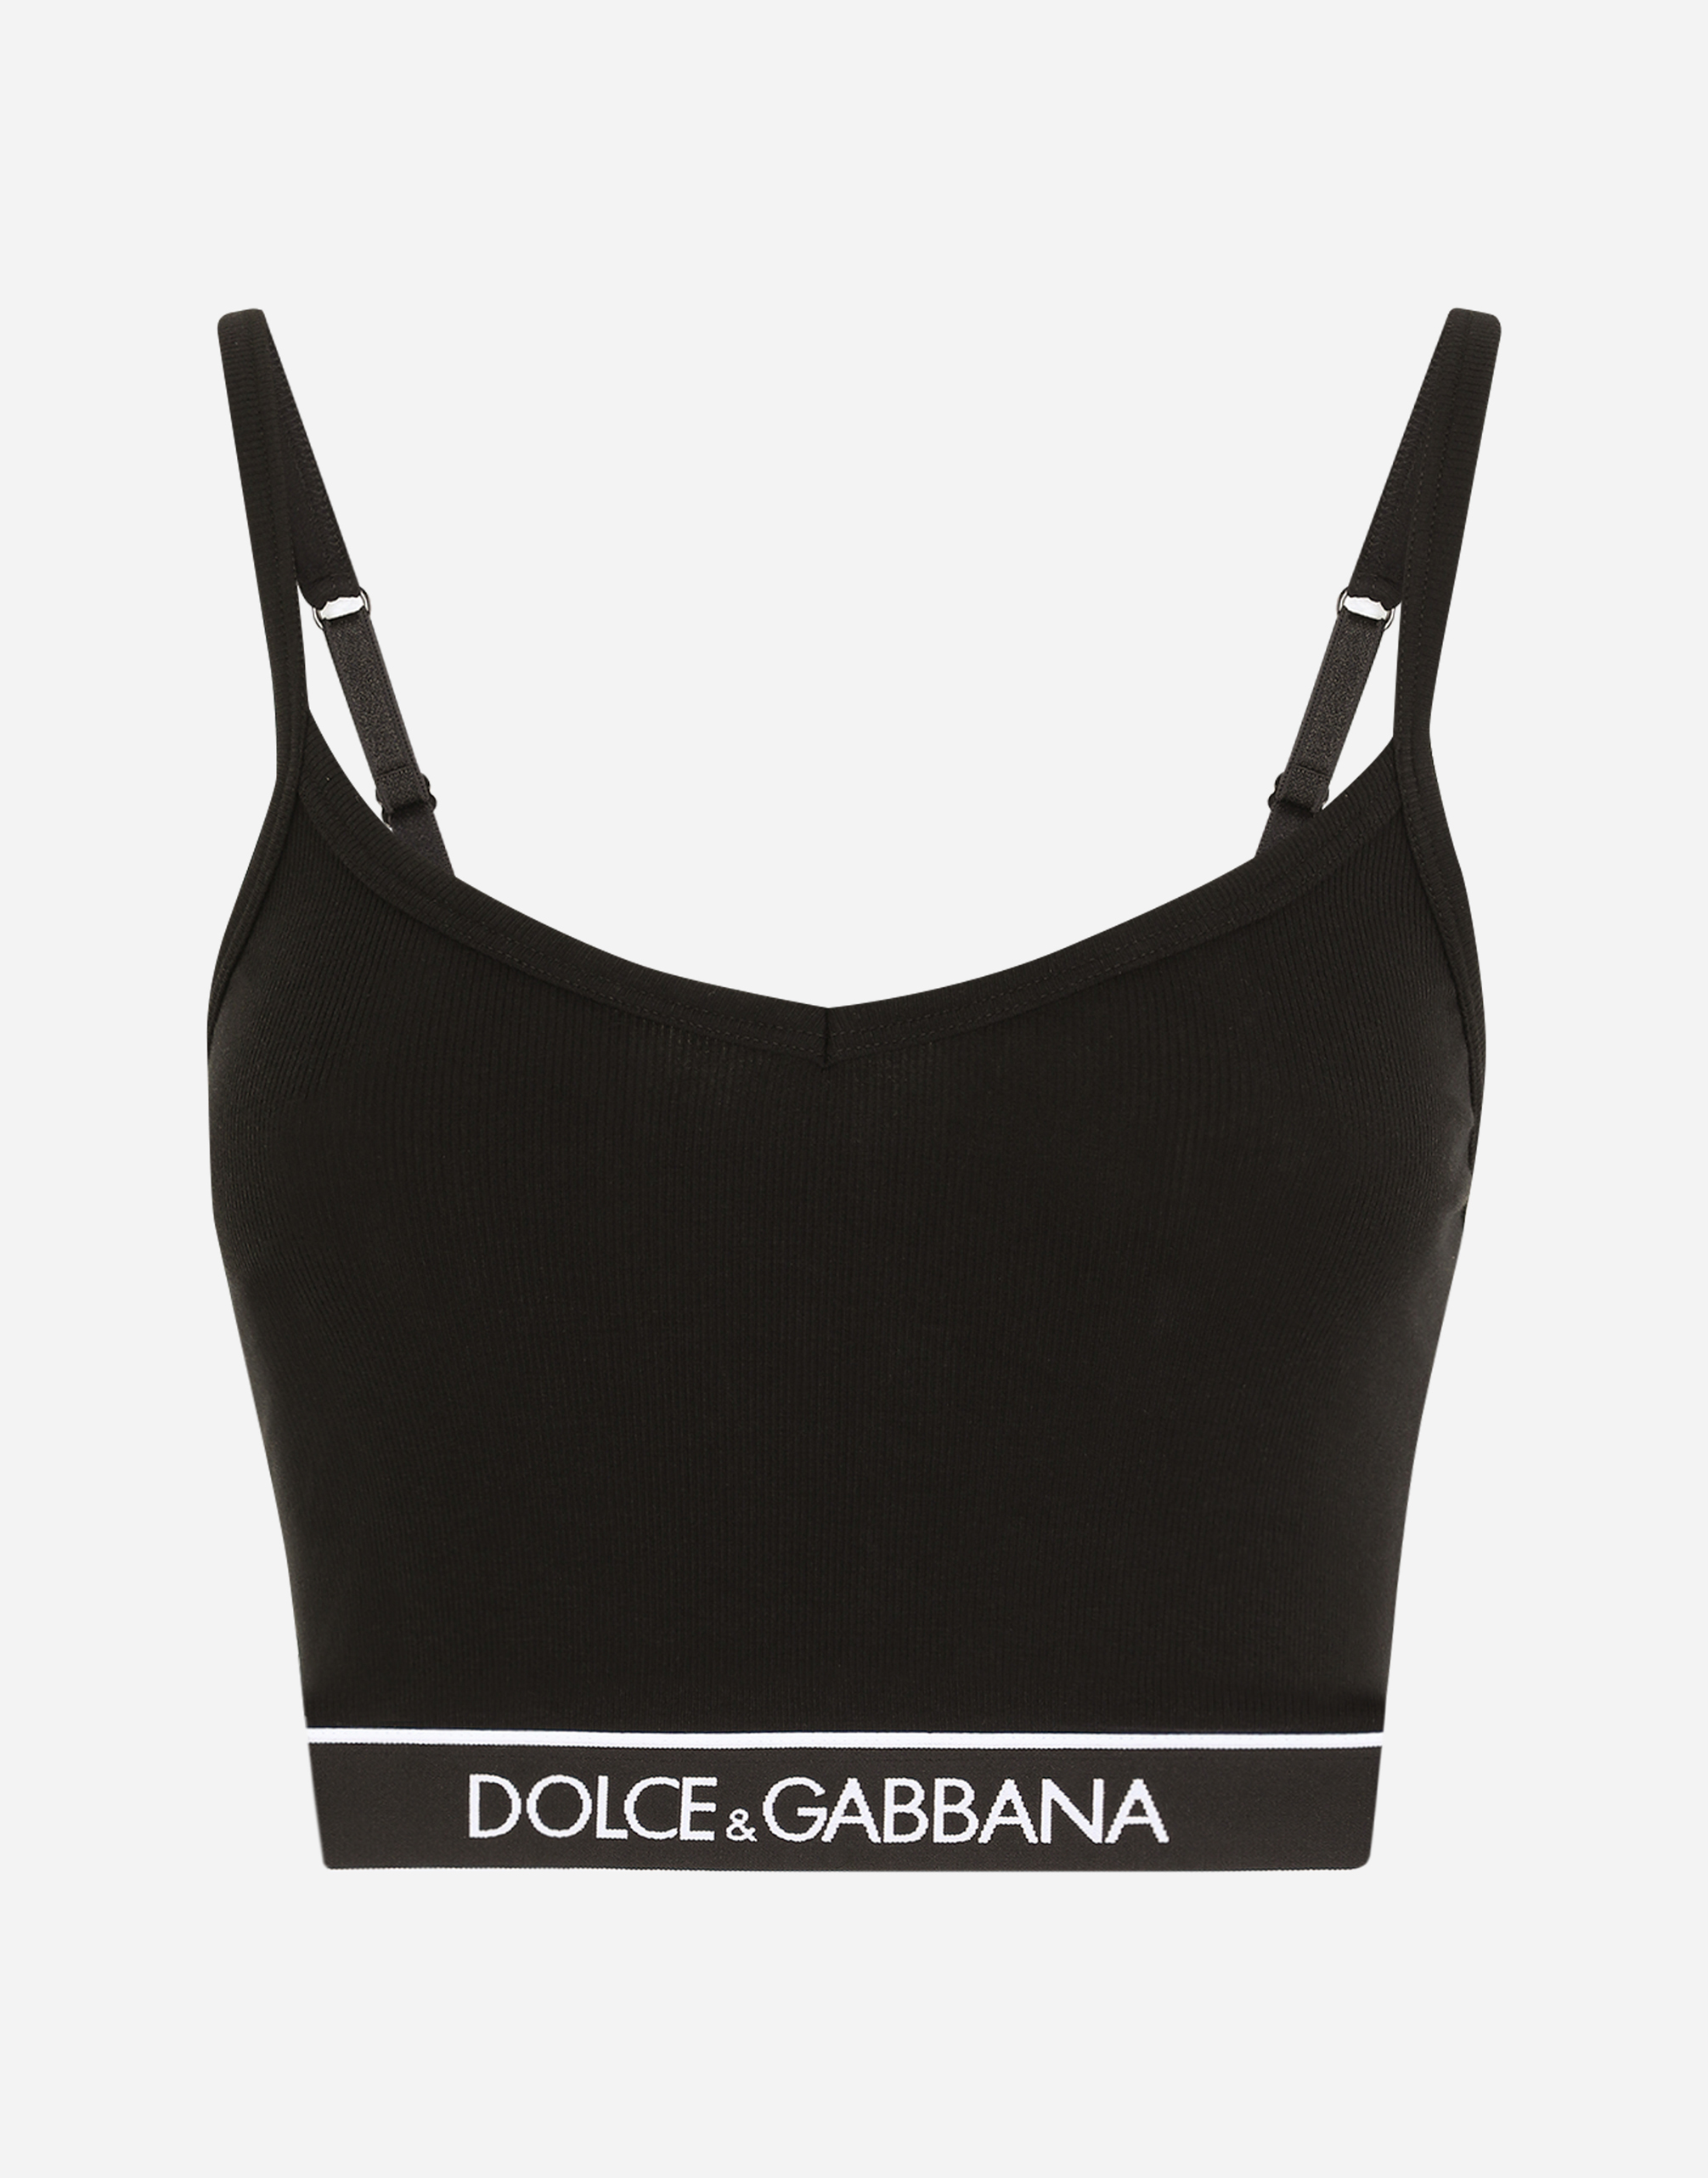 Fine-rib jersey top with spaghetti straps and branded elastic in Black